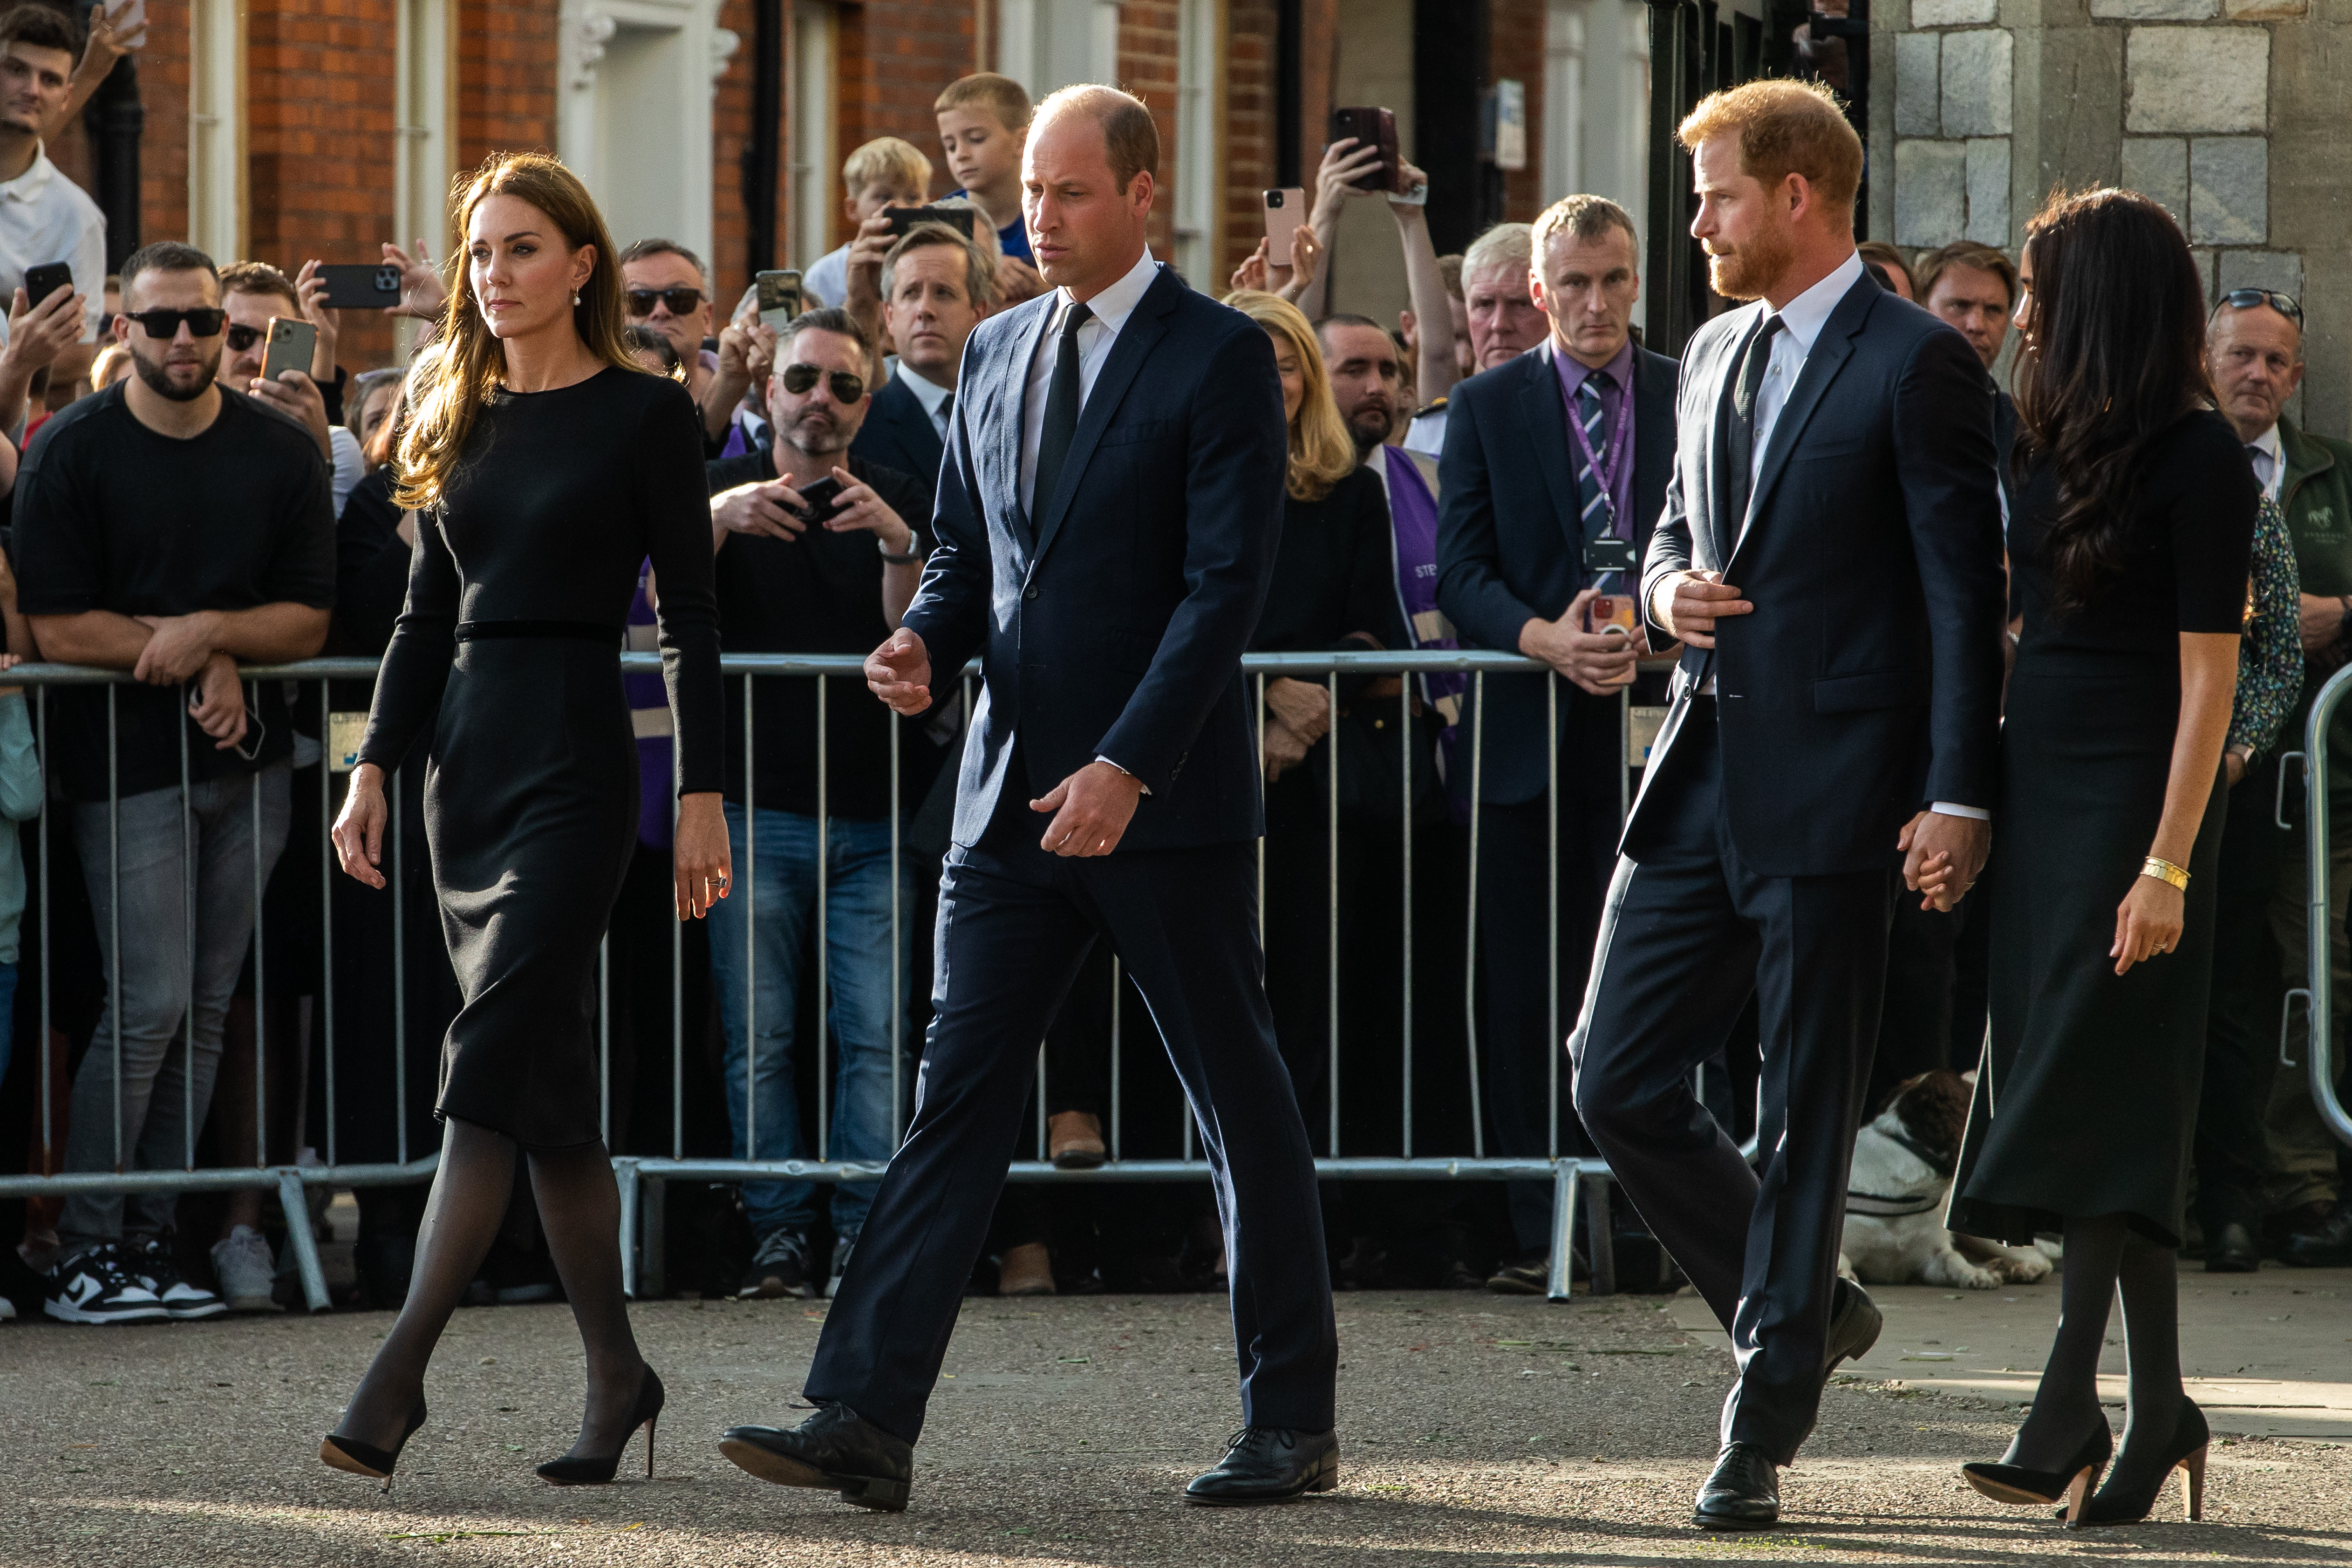 Prince William and Catherine, the new Prince and Princess of Wales, accompanied by Prince Harry and Meghan, the Duke and Duchess of Sussex, proceed to greet well-wishers outside Windsor Castle on 10th September 2022 in Windsor, United Kingdom. | Source: Getty Images